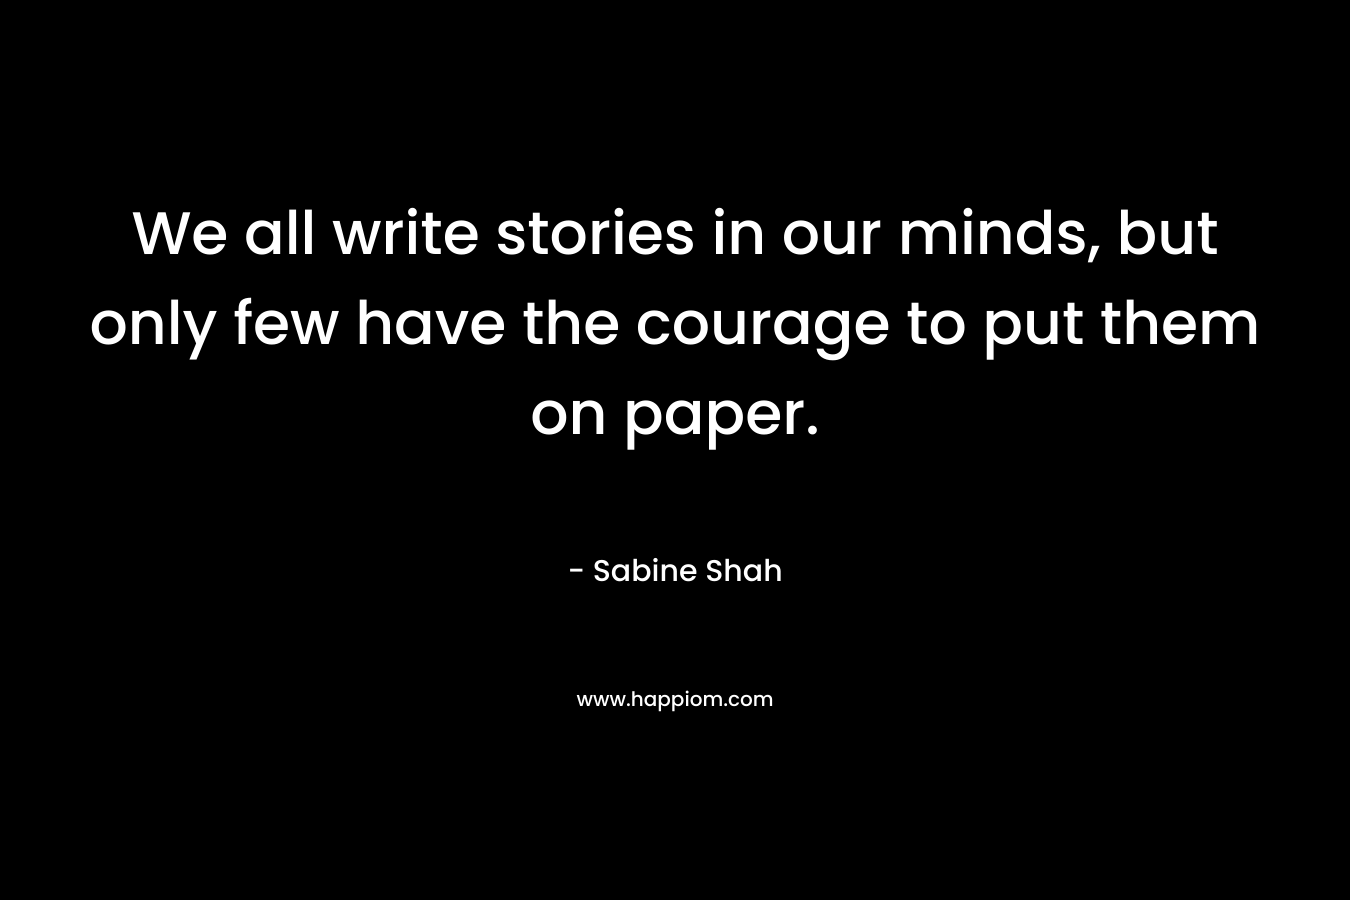 We all write stories in our minds, but only few have the courage to put them on paper.